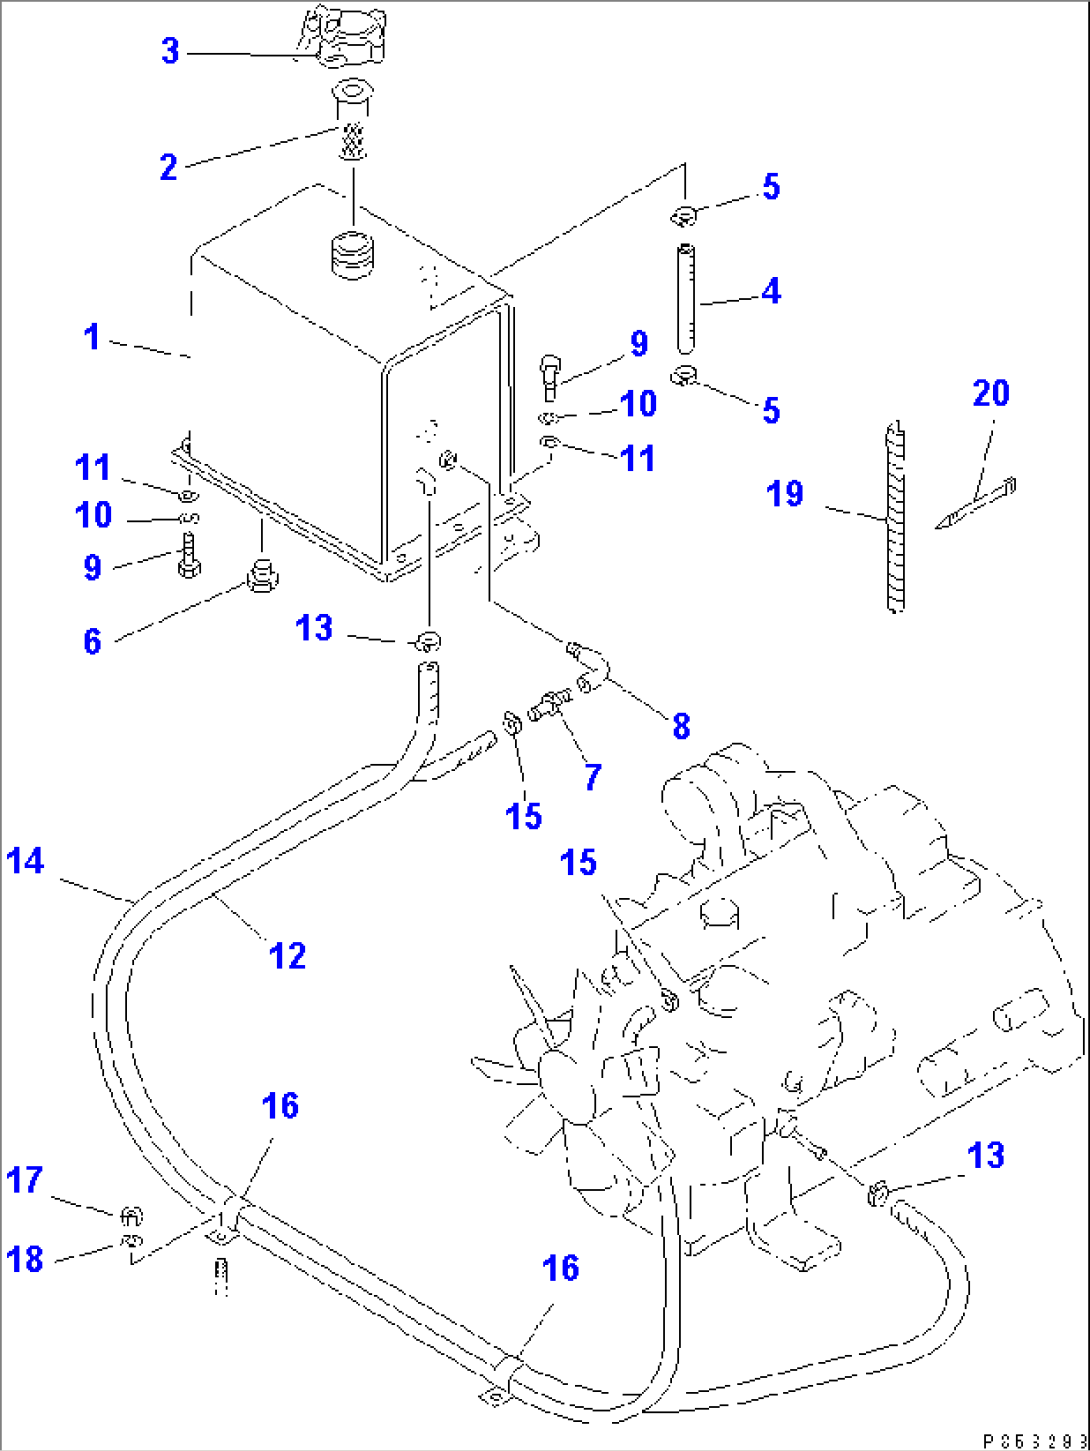 FUEL TANK AND PIPING(#1016-)